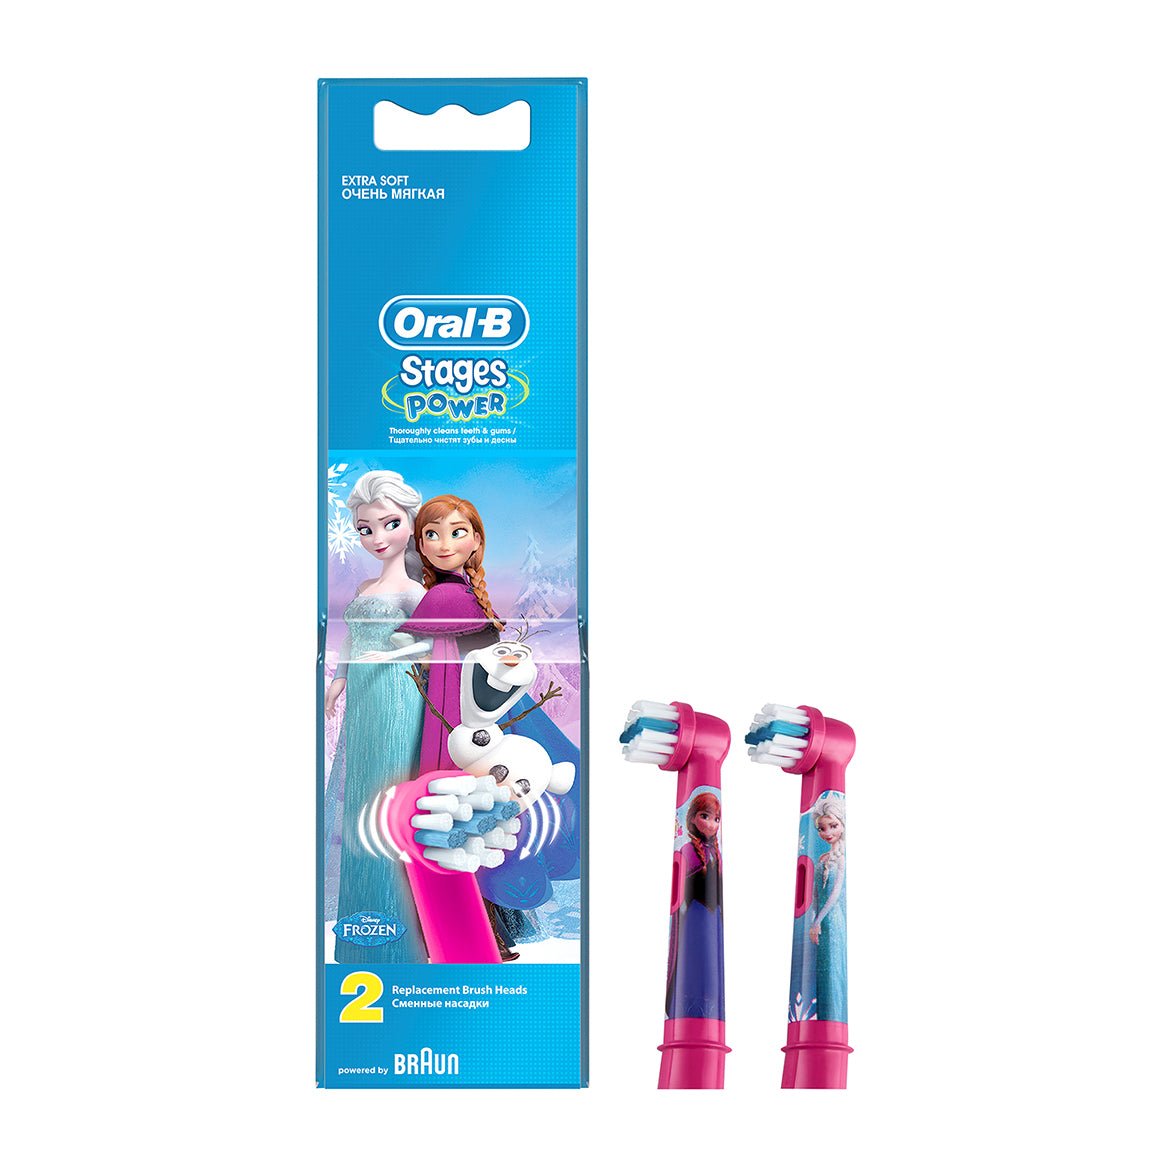 Oral-B Stages Power Kids Frozen Replacement Brush Heads - 2 Pcs - Bloom Pharmacy